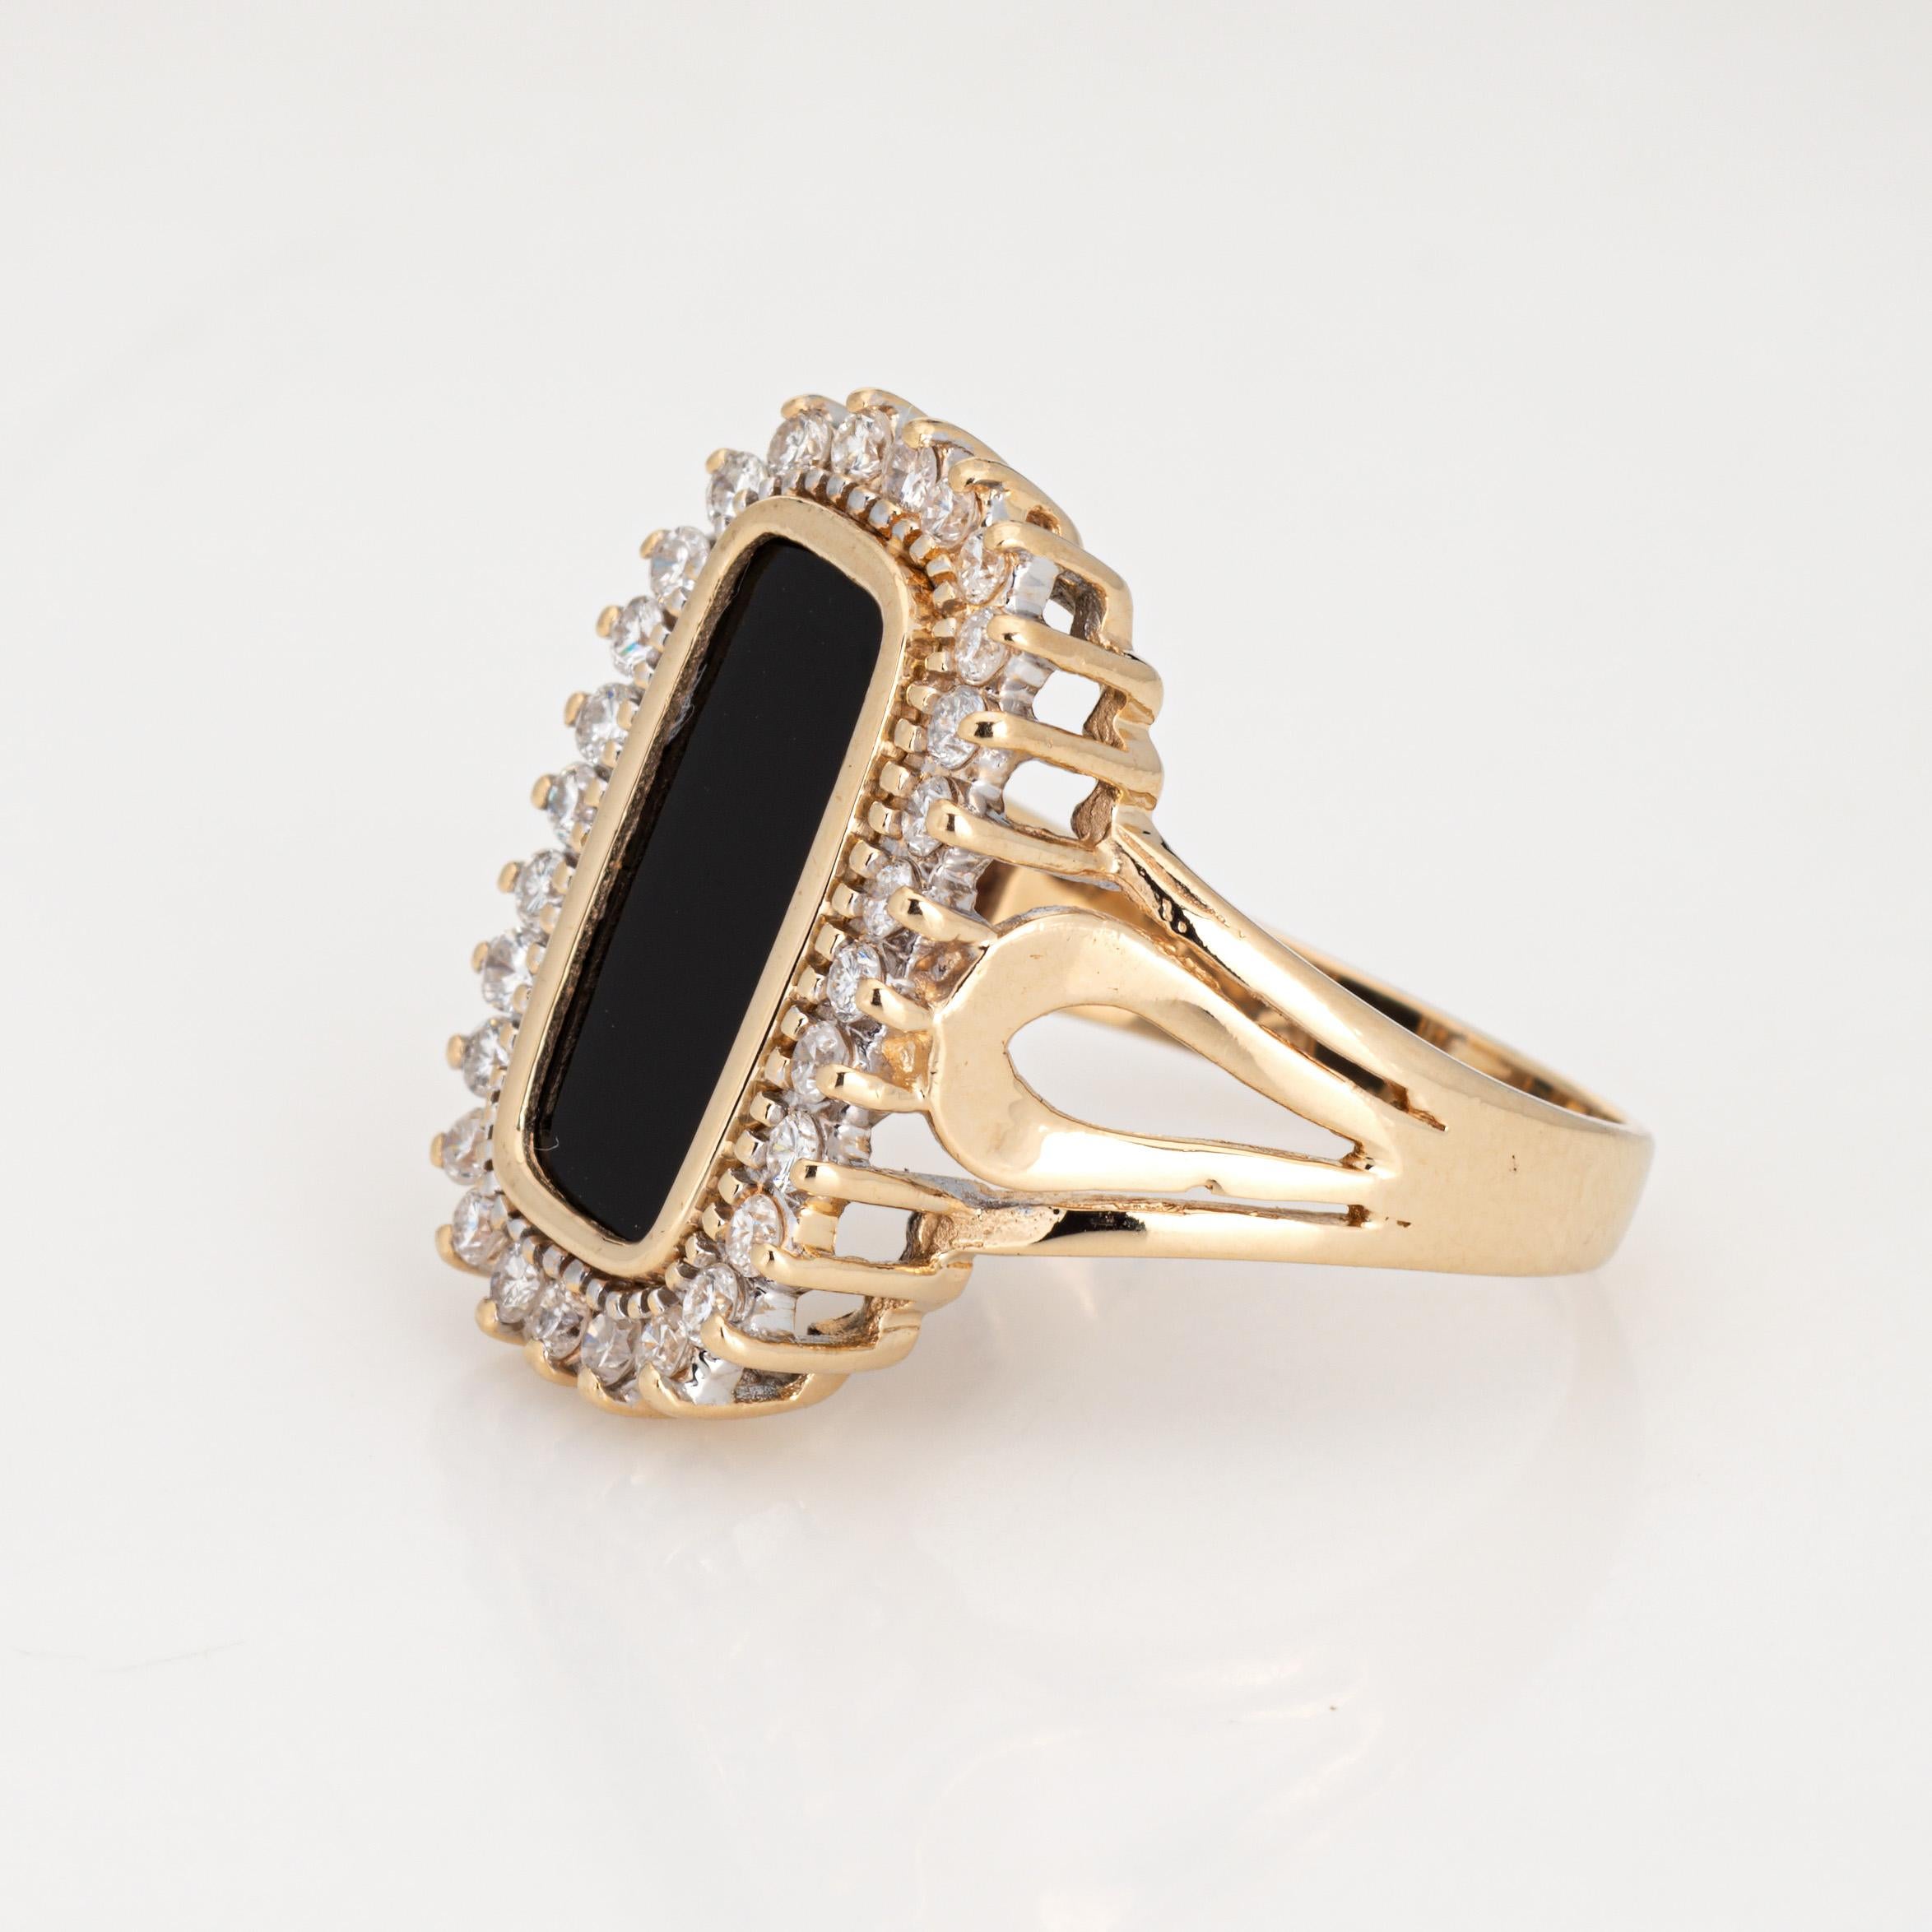 Cabochon Onyx Diamond Ring Vintage 14k Yellow Gold Sz 7.75 Elonged Square Cocktail  For Sale